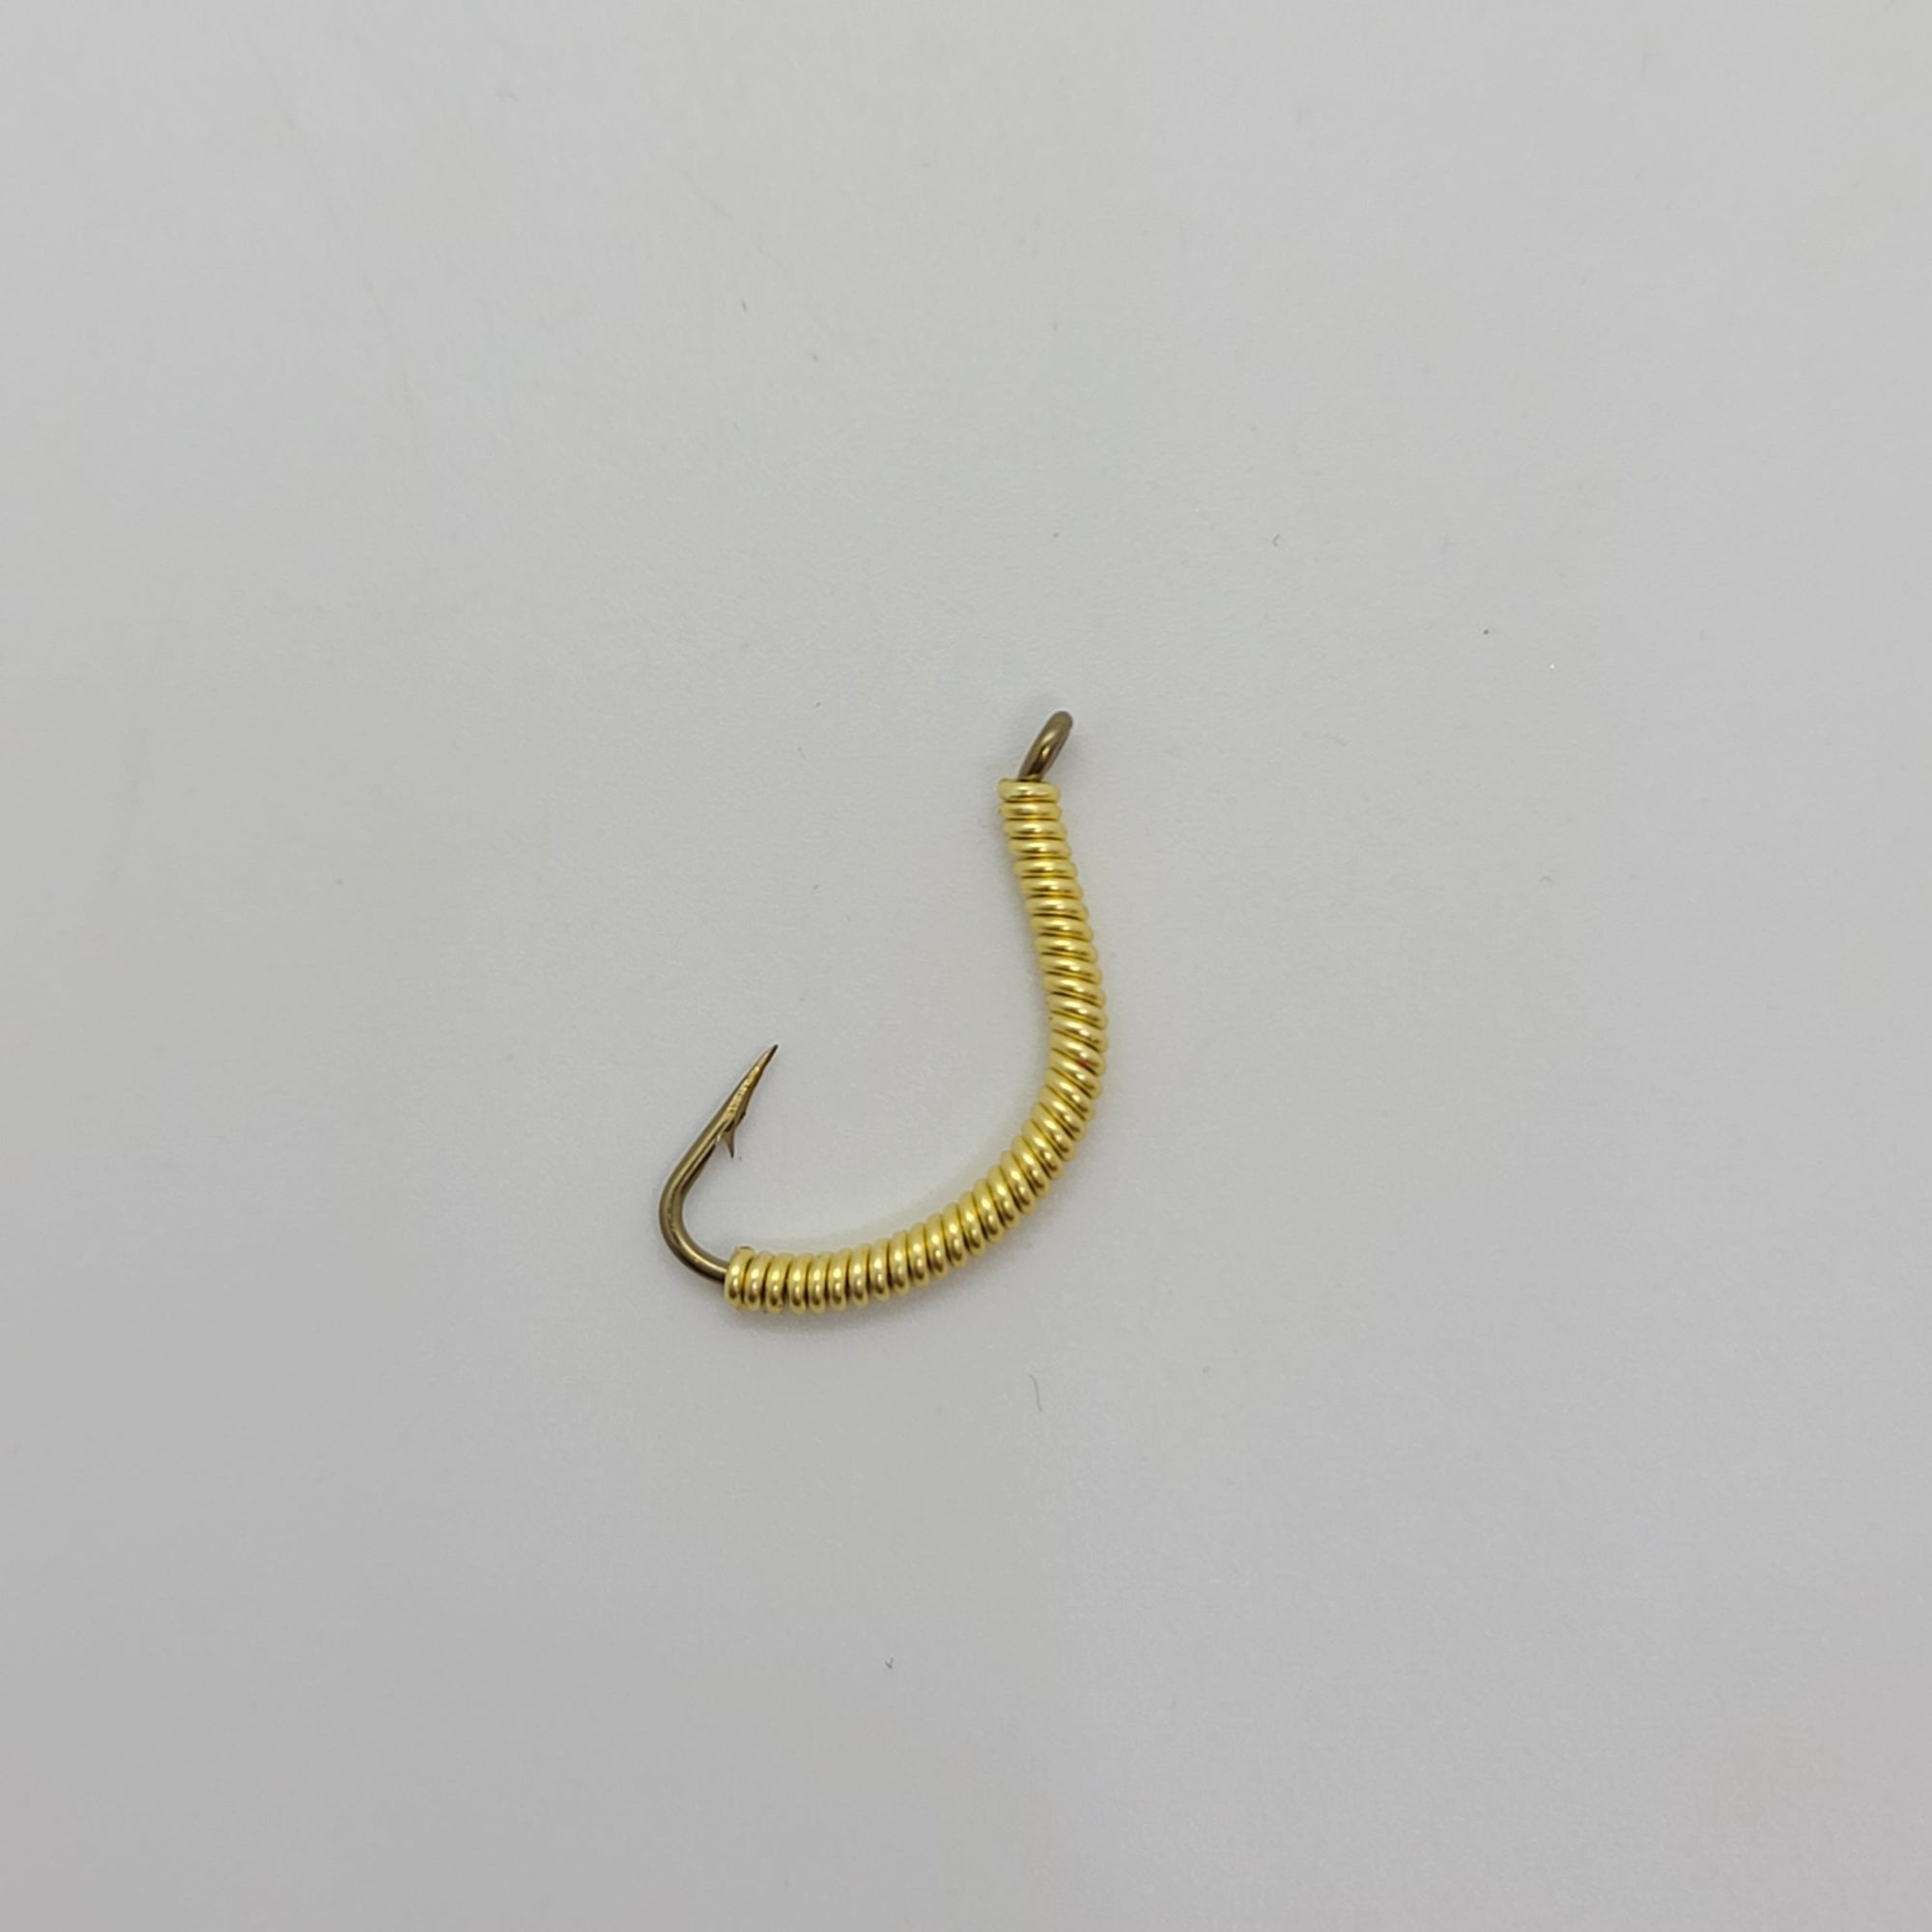 size 12 gold wire worm size 12 wide gap hook